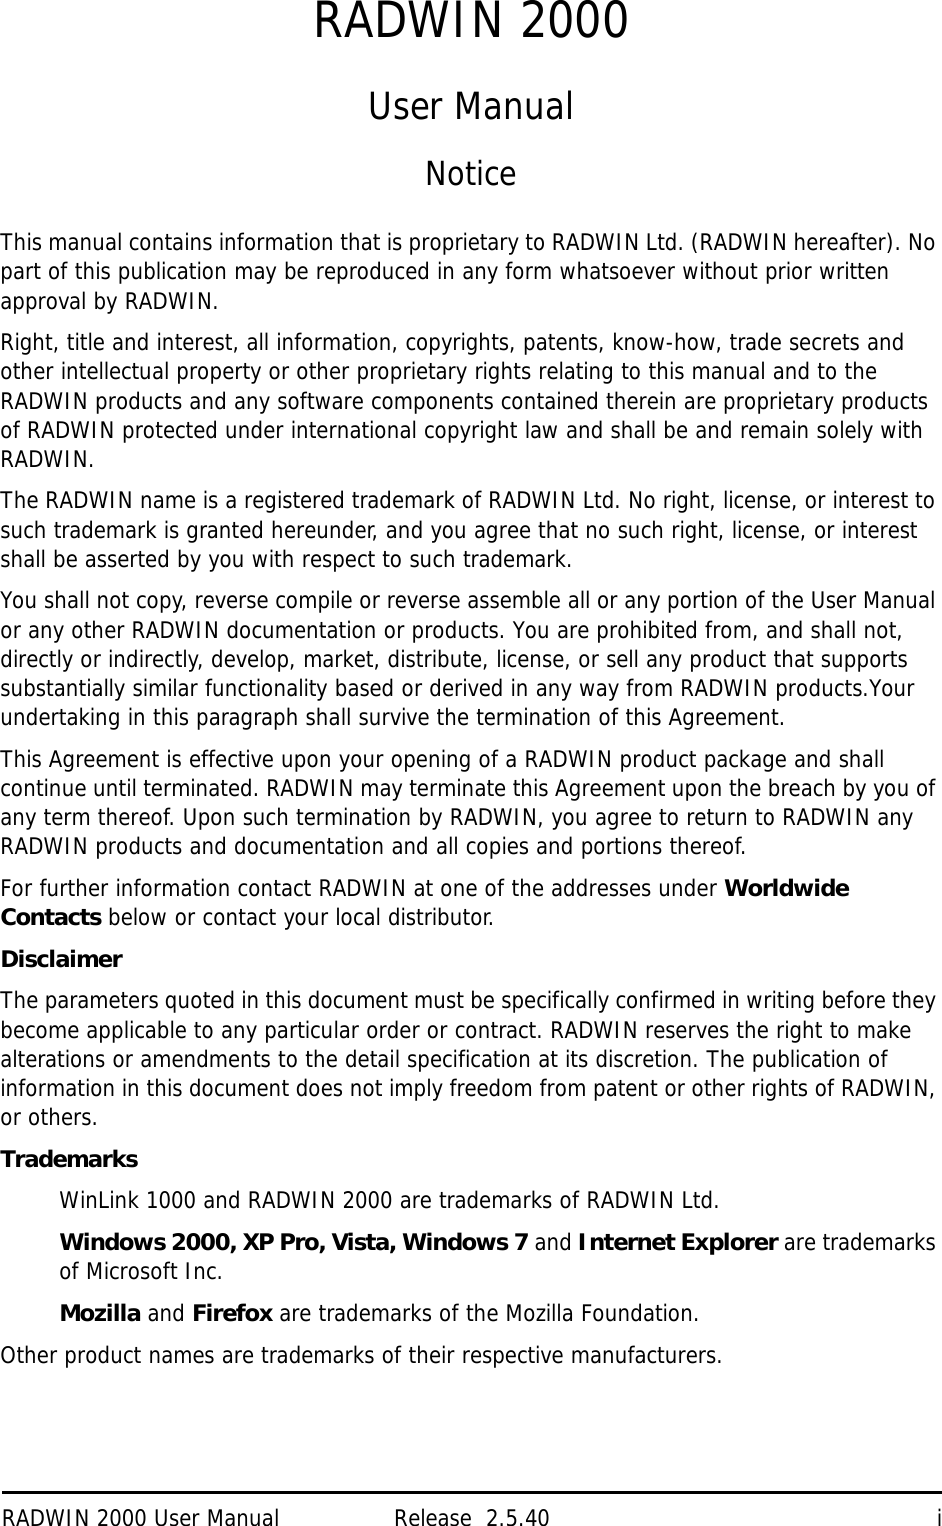 RADWIN 2000 User Manual Release  2.5.40 iRADWIN 2000User ManualNoticeThis manual contains information that is proprietary to RADWIN Ltd. (RADWIN hereafter). No part of this publication may be reproduced in any form whatsoever without prior written approval by RADWIN.Right, title and interest, all information, copyrights, patents, know-how, trade secrets and other intellectual property or other proprietary rights relating to this manual and to the RADWIN products and any software components contained therein are proprietary products of RADWIN protected under international copyright law and shall be and remain solely with RADWIN.The RADWIN name is a registered trademark of RADWIN Ltd. No right, license, or interest to such trademark is granted hereunder, and you agree that no such right, license, or interest shall be asserted by you with respect to such trademark.You shall not copy, reverse compile or reverse assemble all or any portion of the User Manual or any other RADWIN documentation or products. You are prohibited from, and shall not, directly or indirectly, develop, market, distribute, license, or sell any product that supports substantially similar functionality based or derived in any way from RADWIN products.Your undertaking in this paragraph shall survive the termination of this Agreement.This Agreement is effective upon your opening of a RADWIN product package and shall continue until terminated. RADWIN may terminate this Agreement upon the breach by you of any term thereof. Upon such termination by RADWIN, you agree to return to RADWIN any RADWIN products and documentation and all copies and portions thereof.For further information contact RADWIN at one of the addresses under Worldwide Contacts below or contact your local distributor.DisclaimerThe parameters quoted in this document must be specifically confirmed in writing before they become applicable to any particular order or contract. RADWIN reserves the right to make alterations or amendments to the detail specification at its discretion. The publication of information in this document does not imply freedom from patent or other rights of RADWIN, or others.TrademarksWinLink 1000 and RADWIN 2000 are trademarks of RADWIN Ltd.Windows 2000, XP Pro, Vista, Windows 7 and Internet Explorer are trademarks of Microsoft Inc.Mozilla and Firefox are trademarks of the Mozilla Foundation.Other product names are trademarks of their respective manufacturers. 